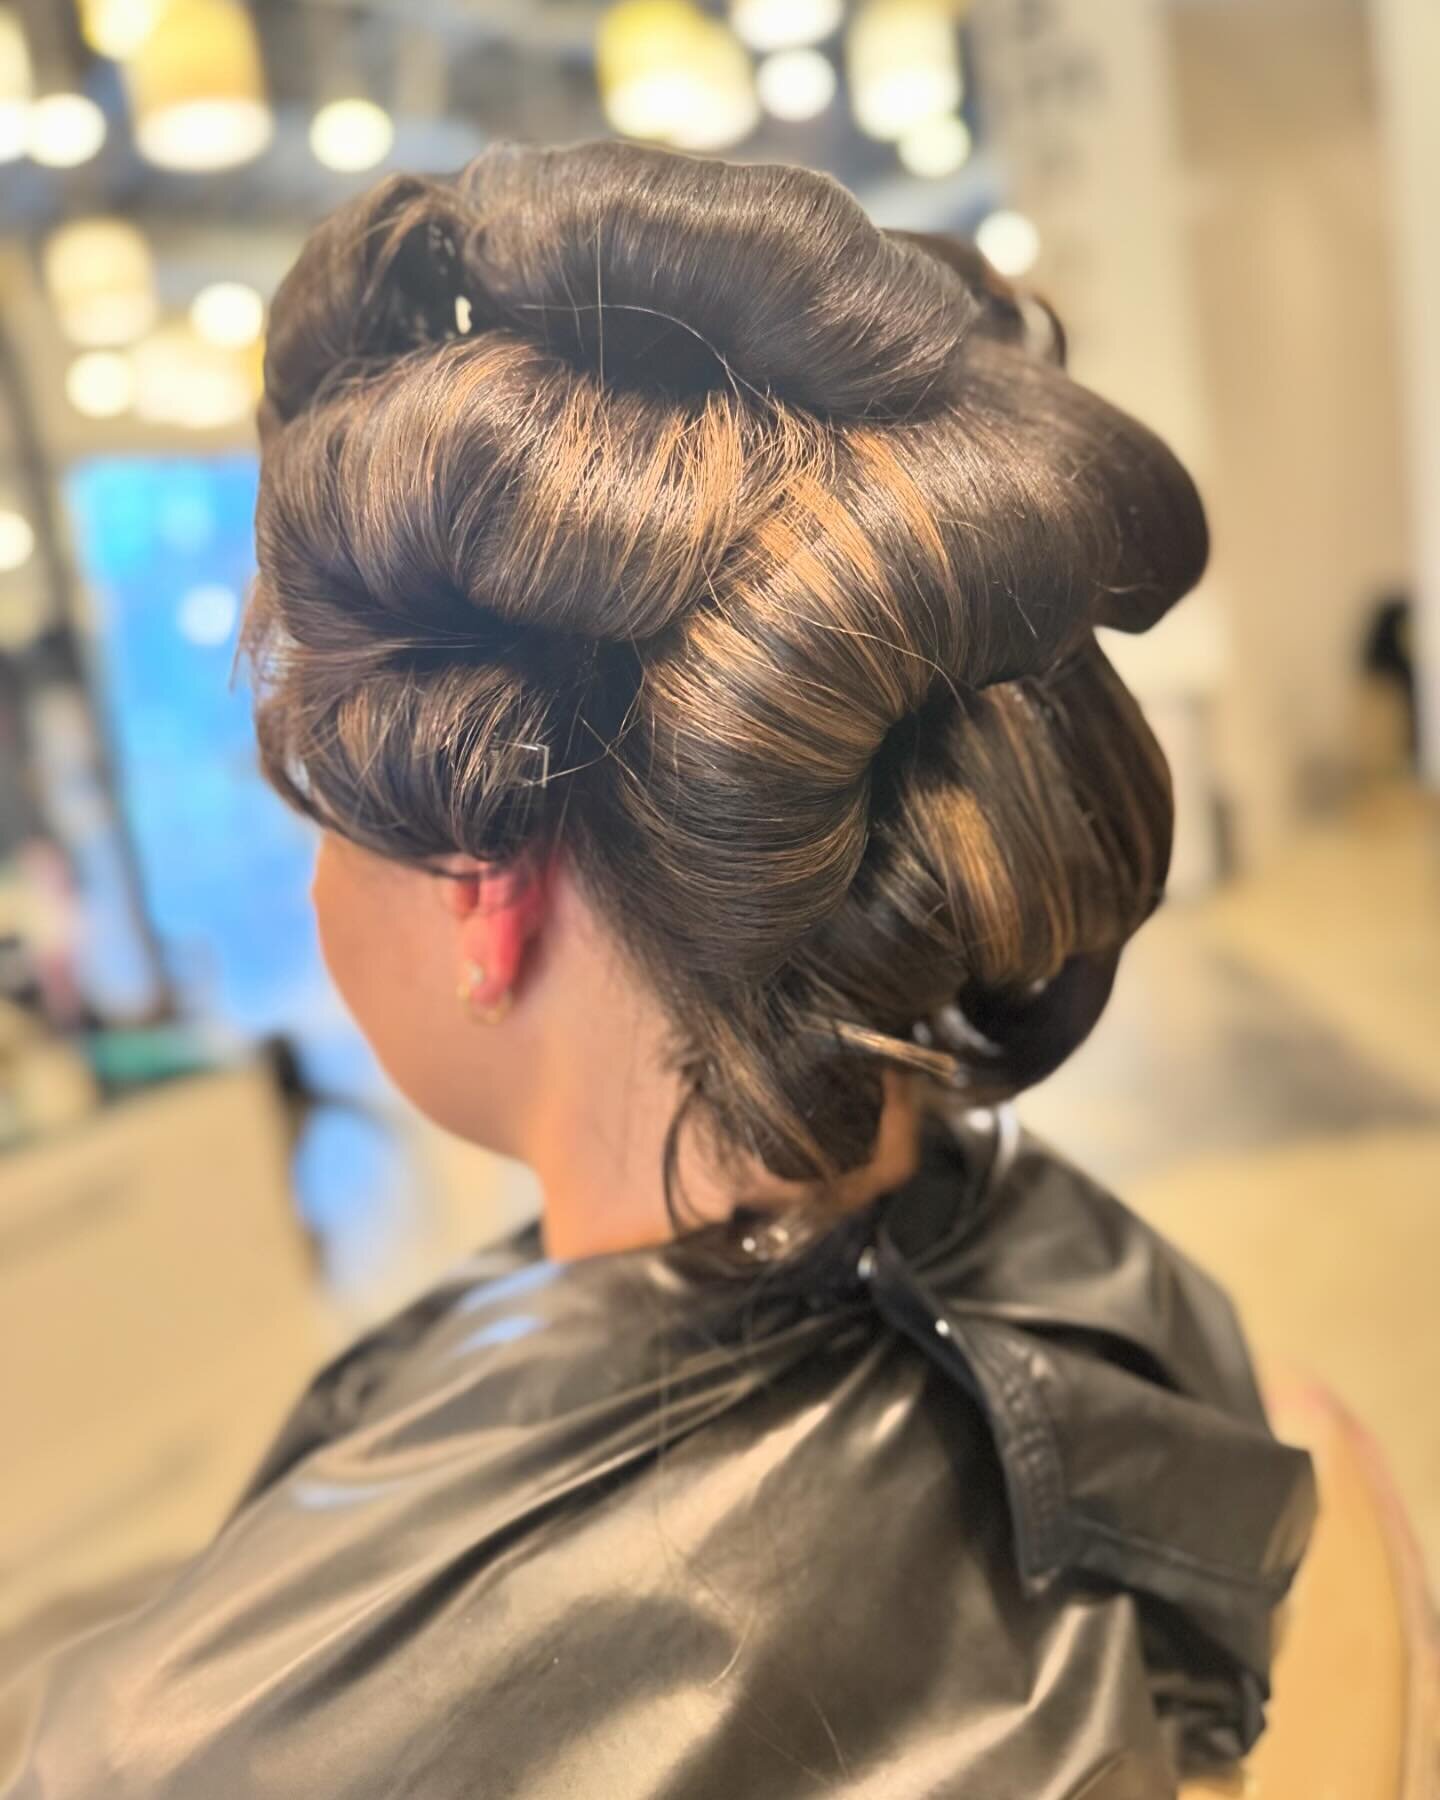 @curllece putting in the work to make sure your style stays no matter what 💪 scroll to see the finished look
&bull;
&bull;
&bull;
#curlyhair #olaplex #olaplextreatment #indystylist #carmelstylist #blowout #curlyhairstyles #curlystylist #alltexturesw